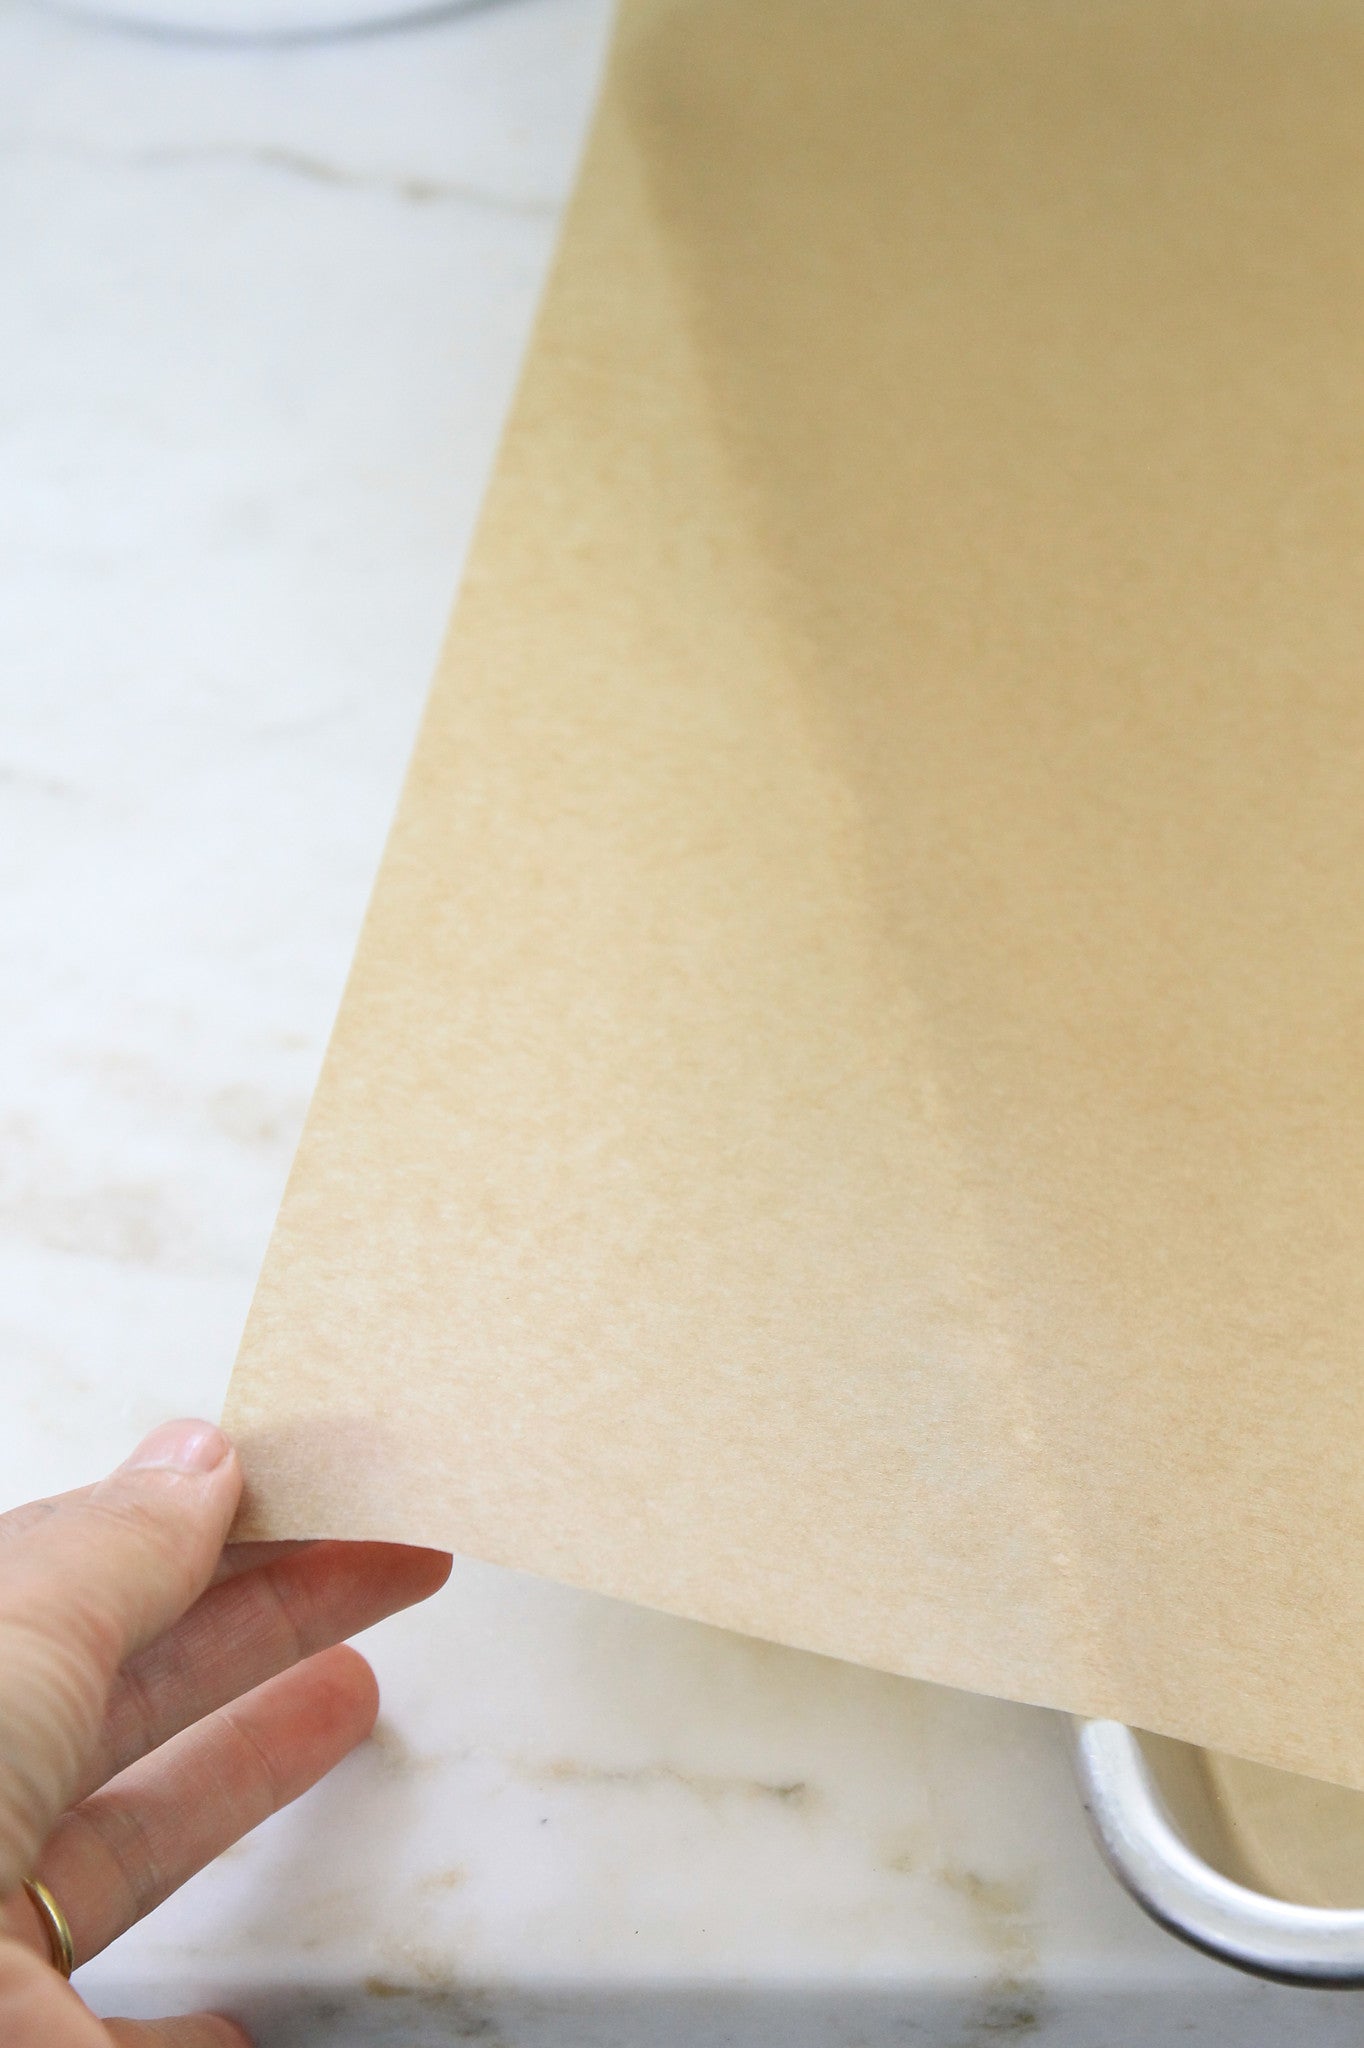 Unbleached Nature Brown Parchment Paper Sheet - Buy Unbleached Nature Brown Parchment  Paper Sheet Product on